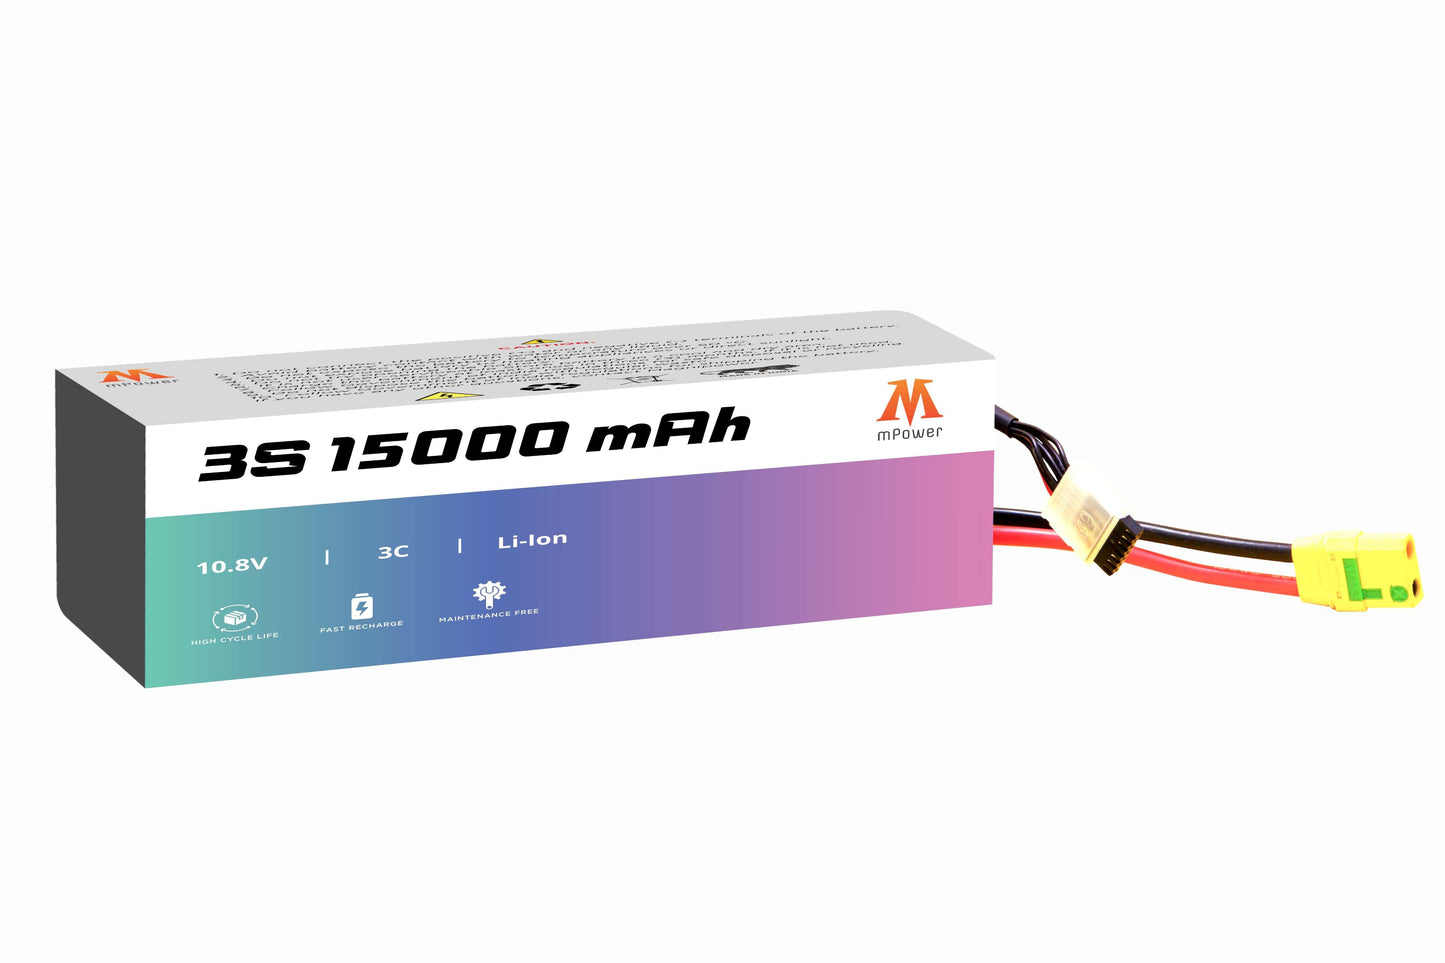 mPower 3S 15000mAh 3C Lithium-Ion Battery for Survey Drones